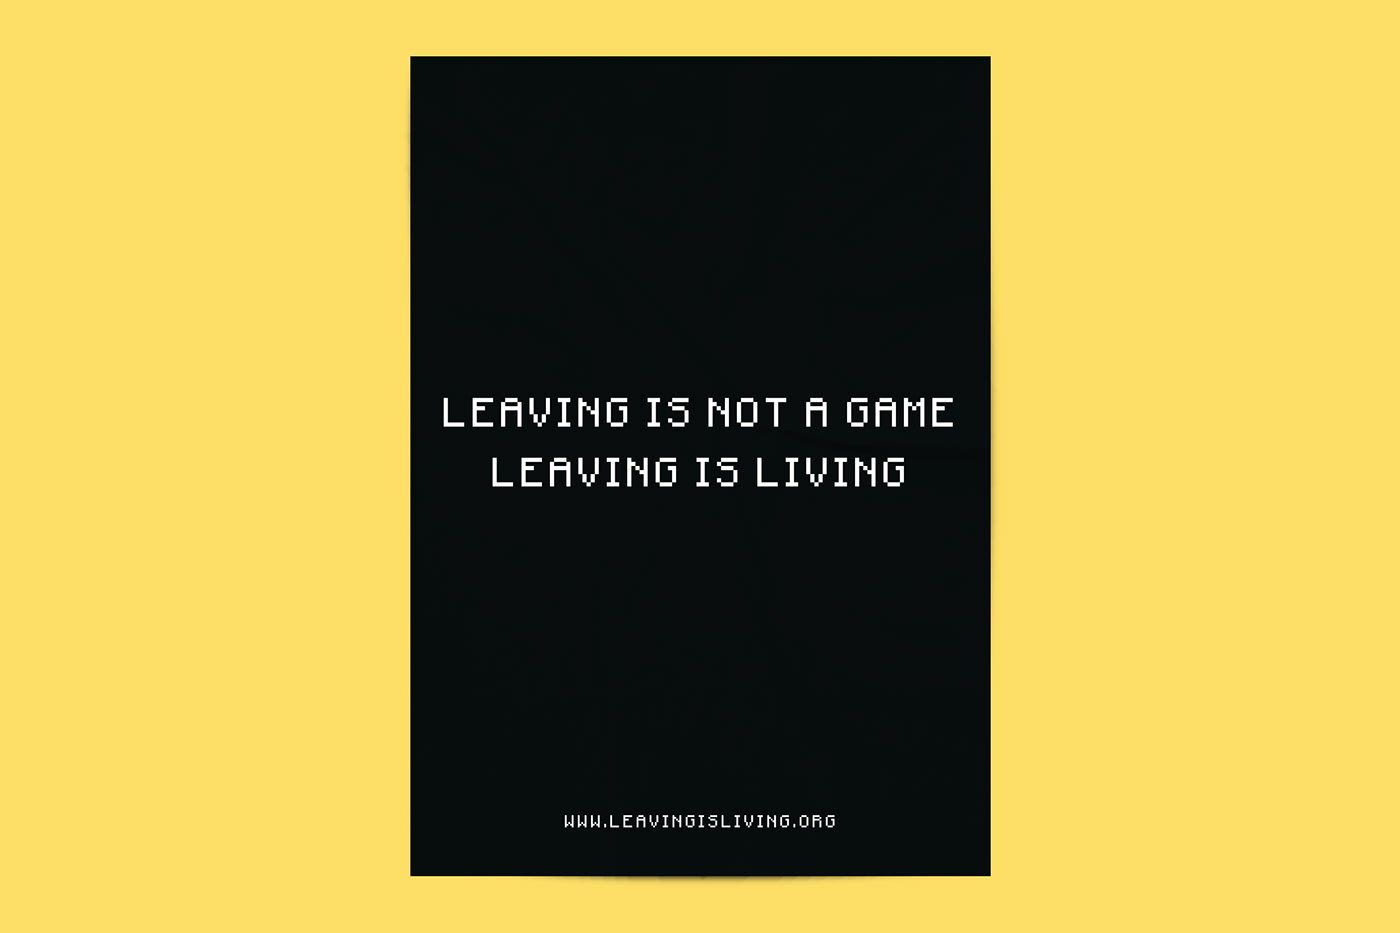 Leaving is Living - Social Campaign. on Behance